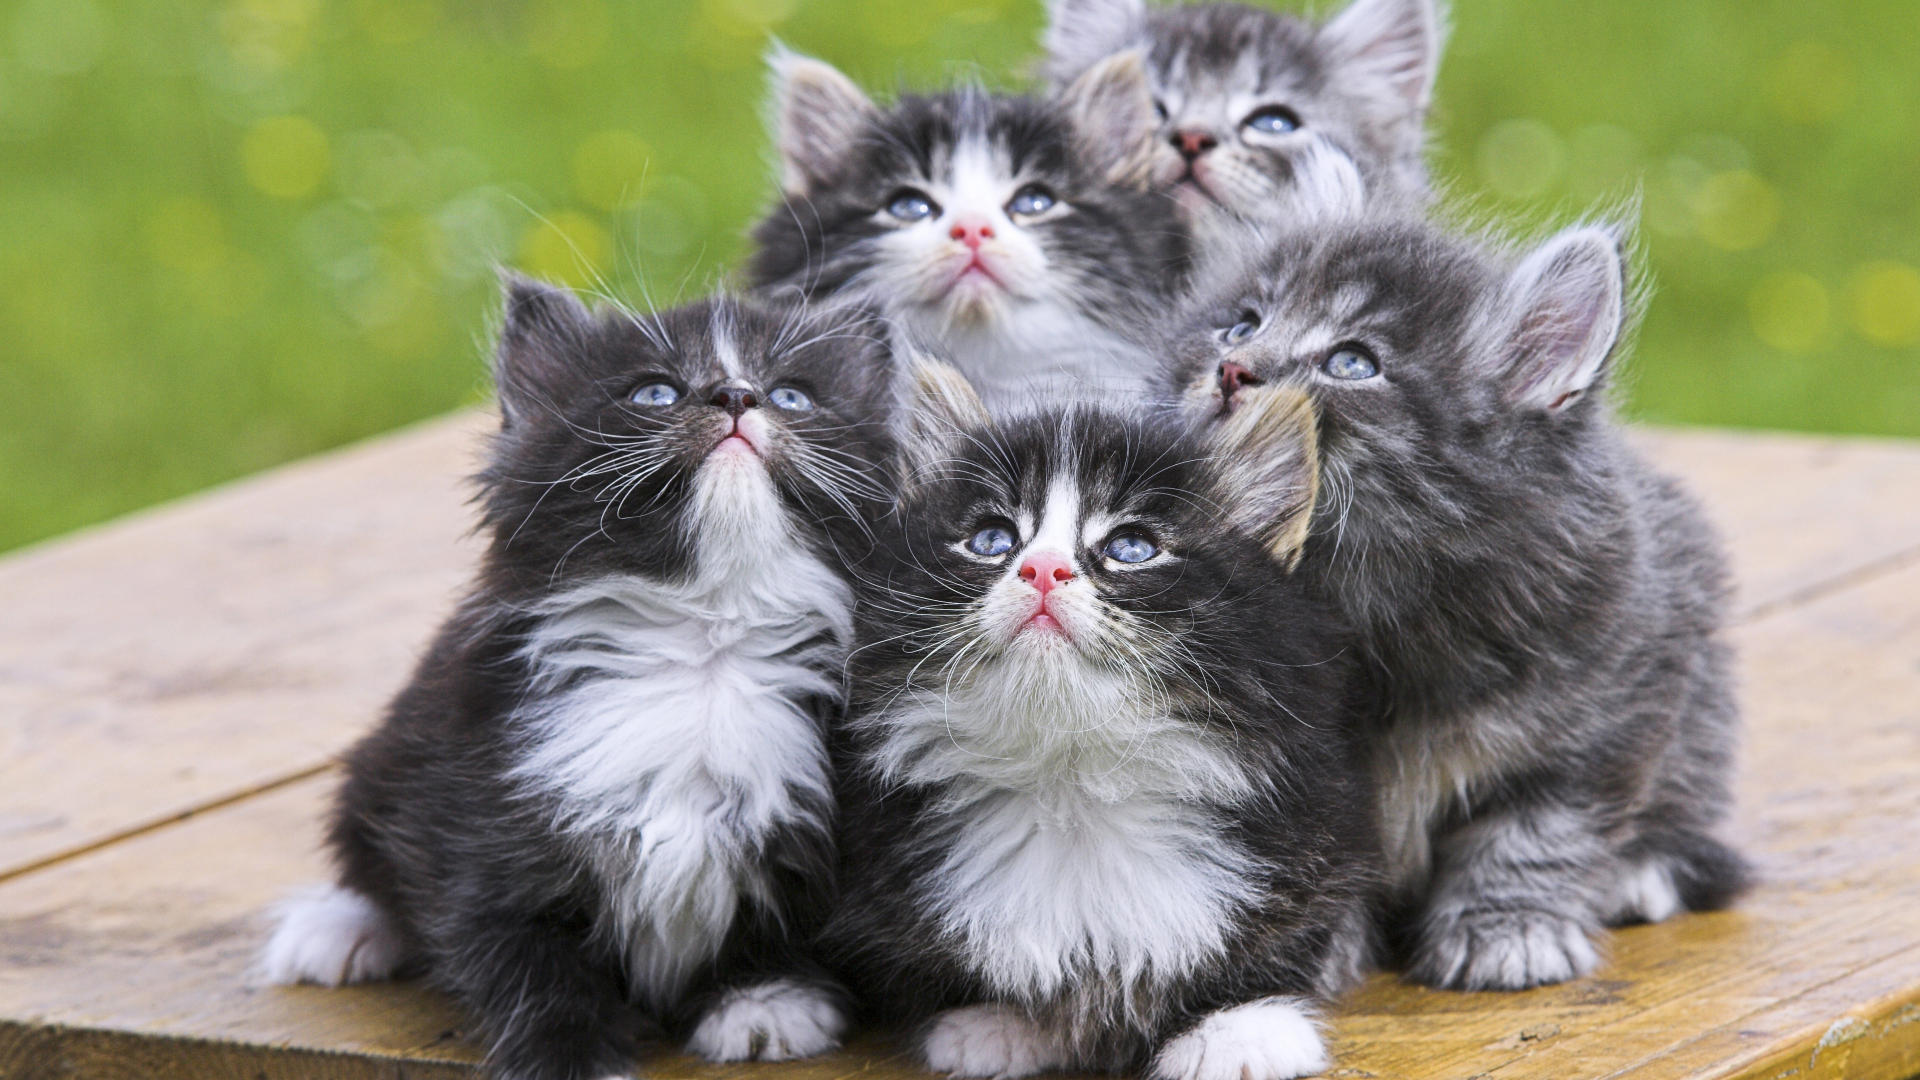 S Persian Kittens HD Wallpaper In High Resolution For